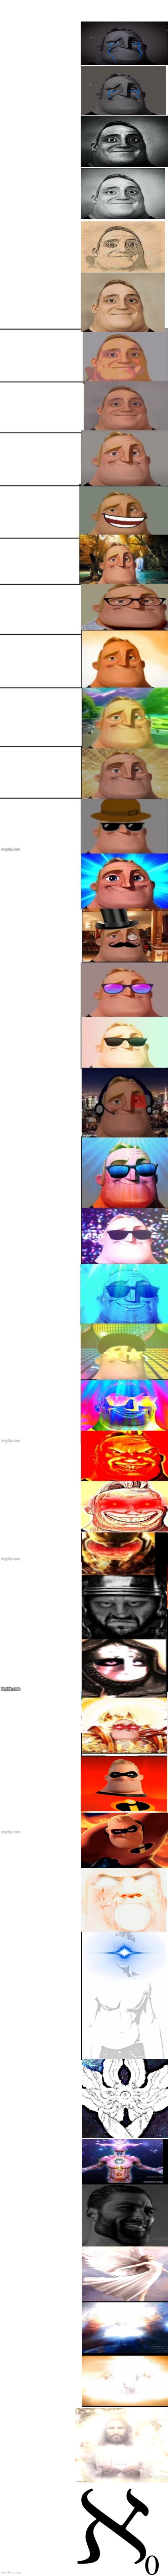 Mr. Incredible becoming canny Sapphire-extended version | image tagged in memes,blank transparent square,mr incredible becoming canny all star phases | made w/ Imgflip meme maker